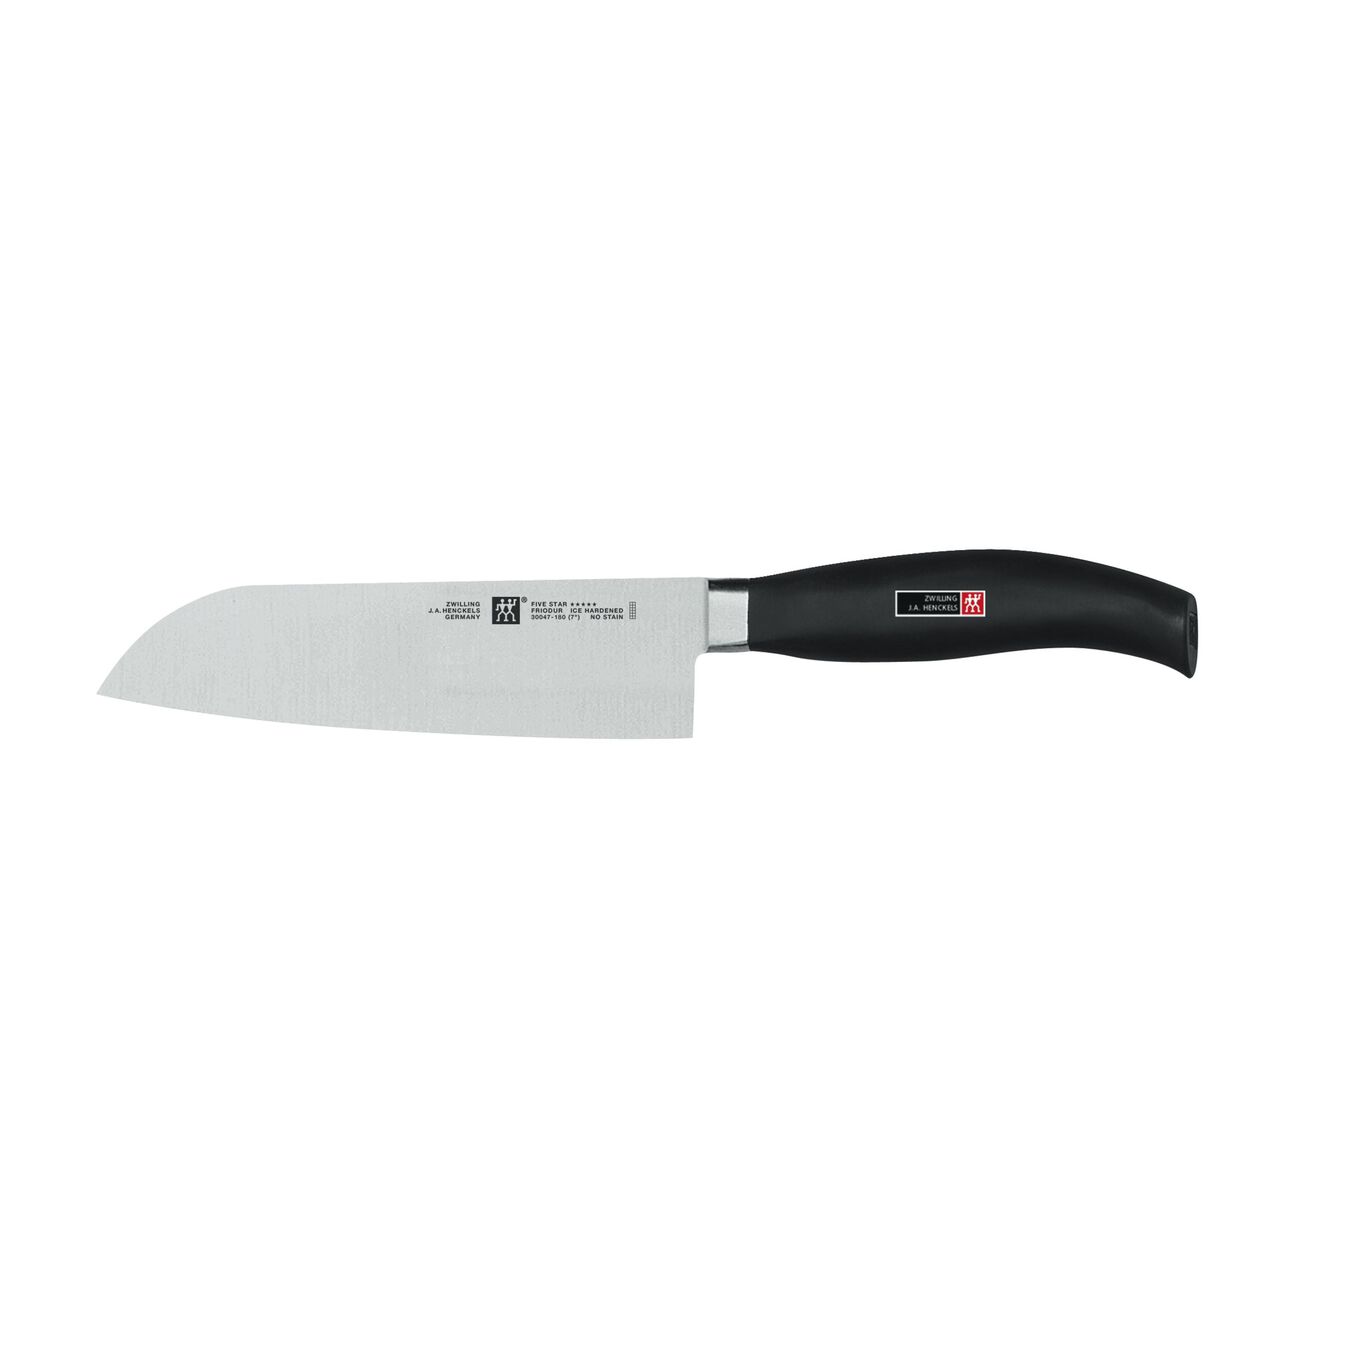 7 inch Santoku - Visual Imperfections,,large 1